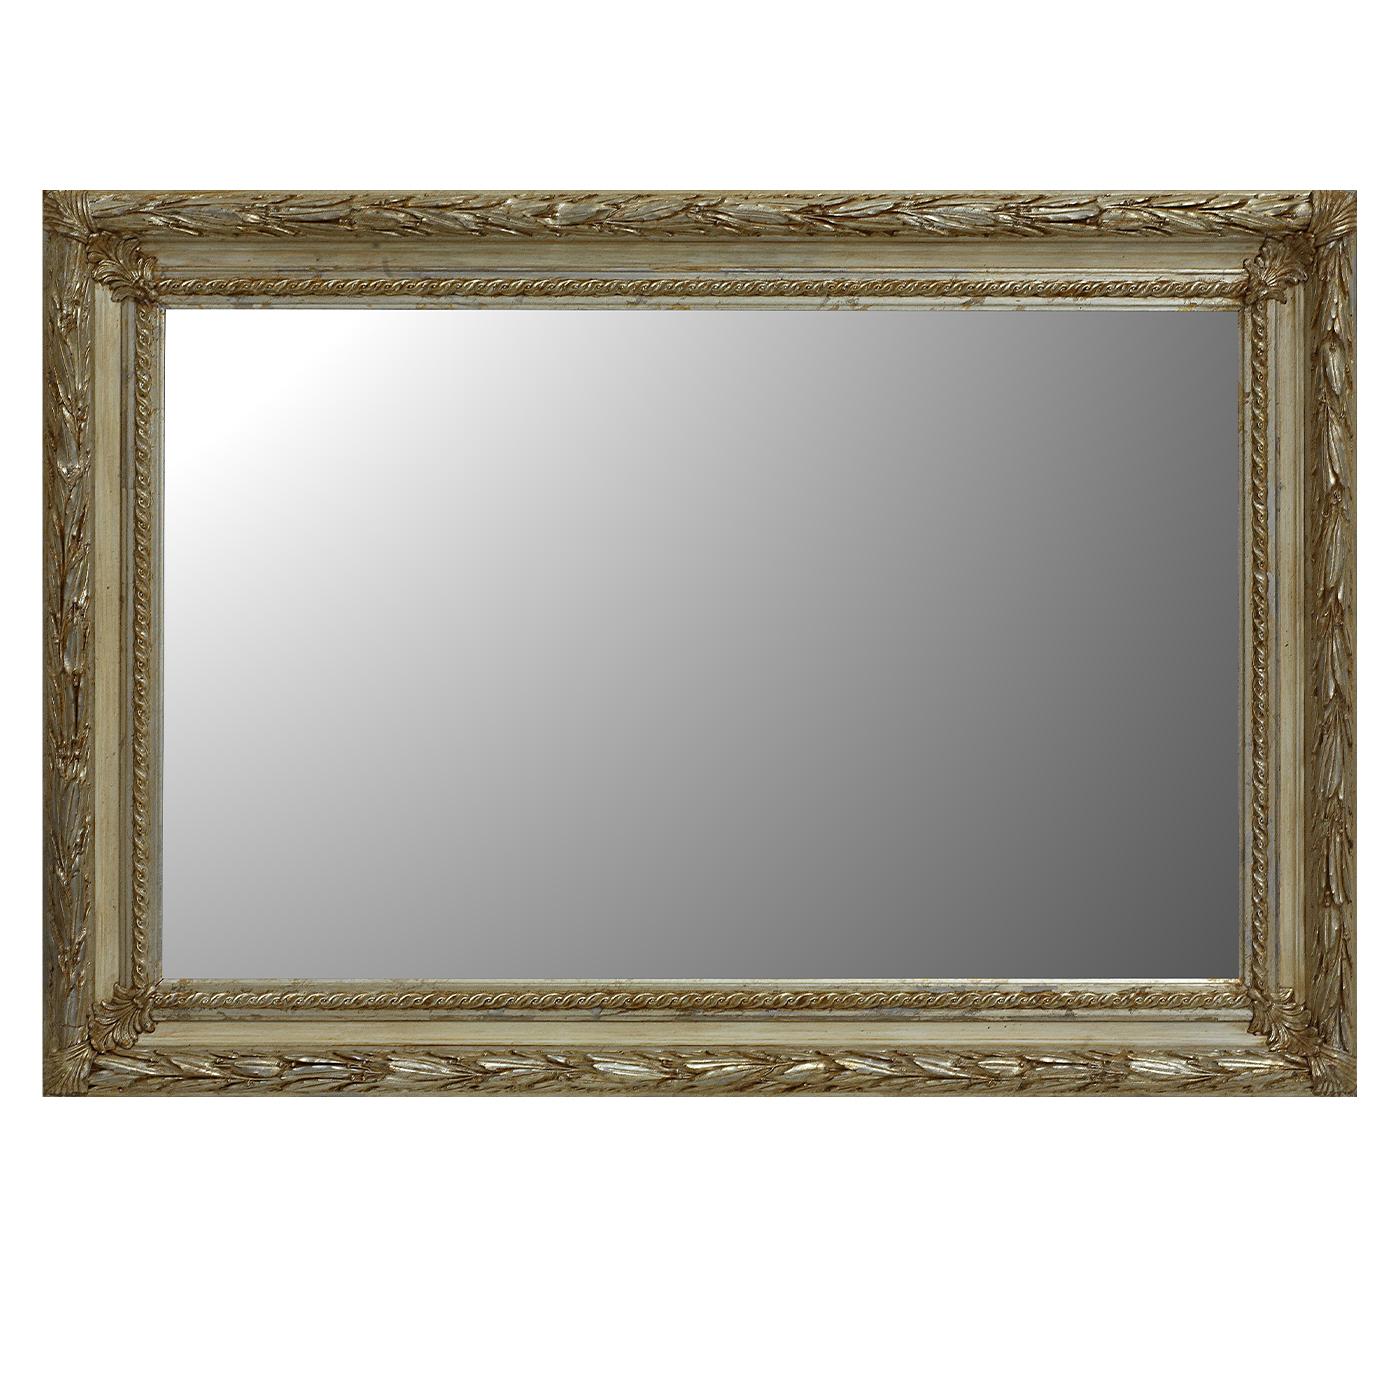 Extremely elegant in the choice of tones and materials, this gorgeous wall mirror is defined by an extraordinary wooden frame, finished with Mecca silver leaf highlighting its dramatic flair of Empire style inspiration. This piece will make a